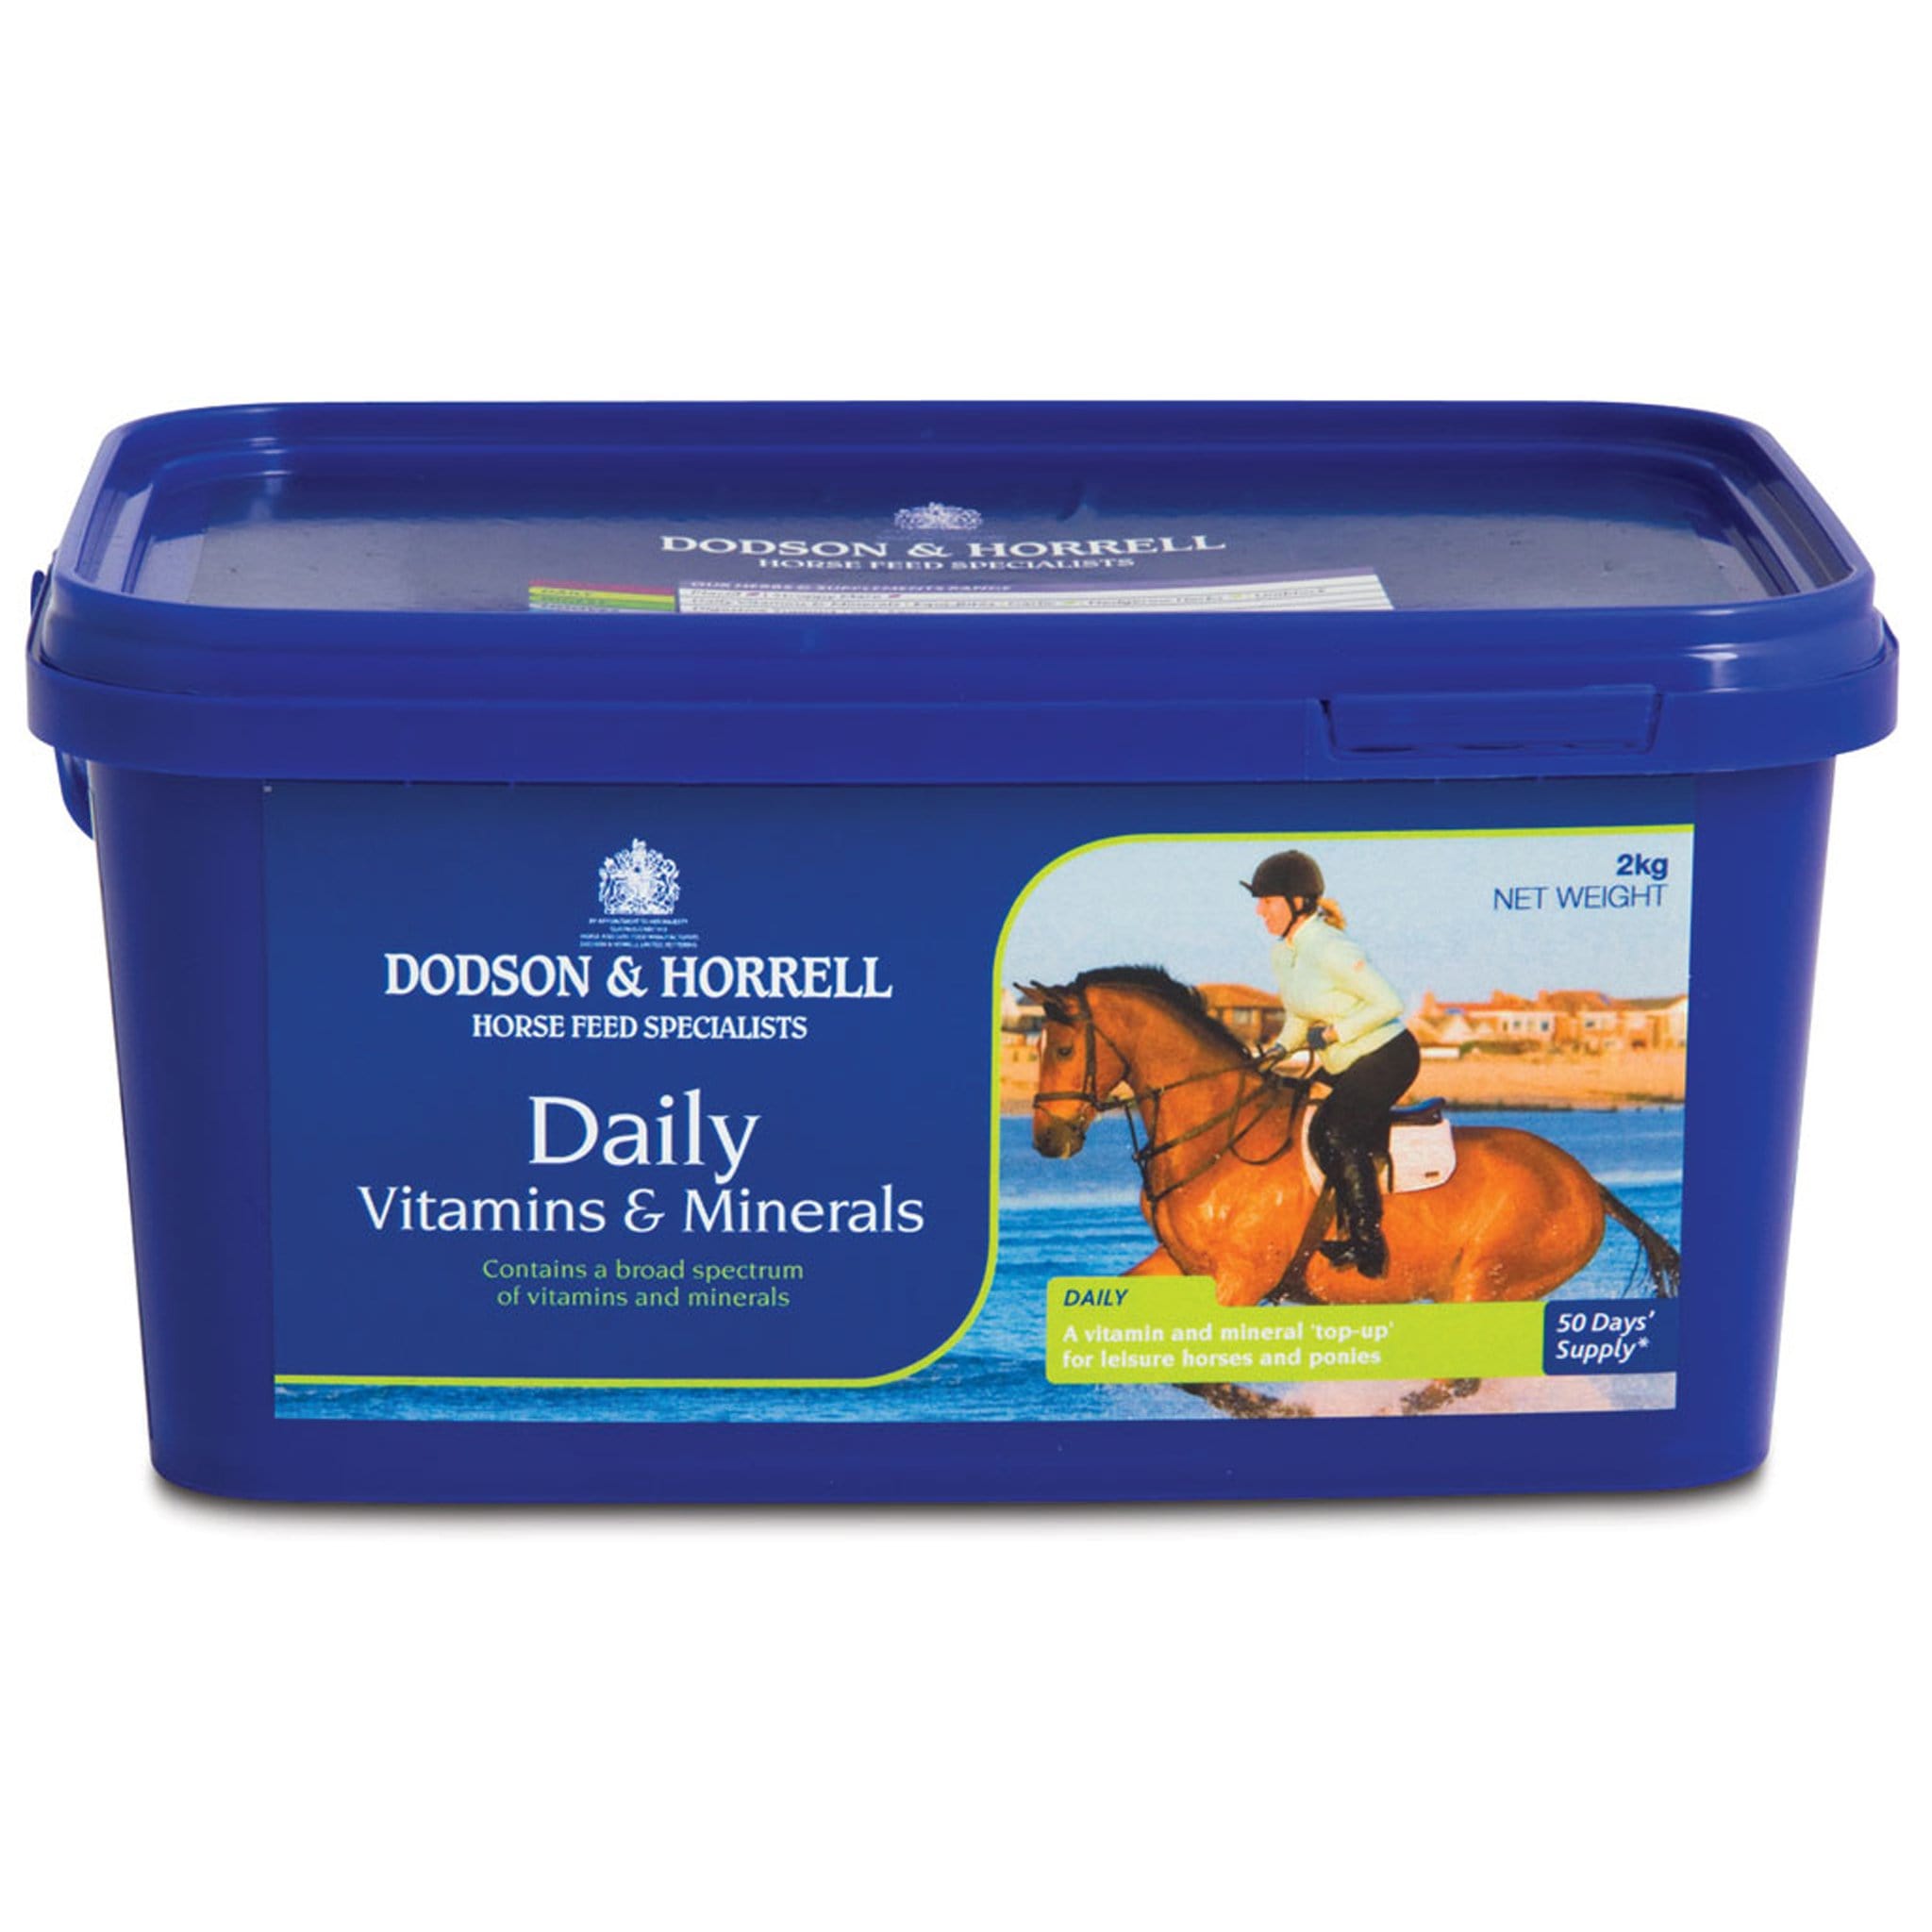 Dodson and Horrell Daily Vitamins and Minerals